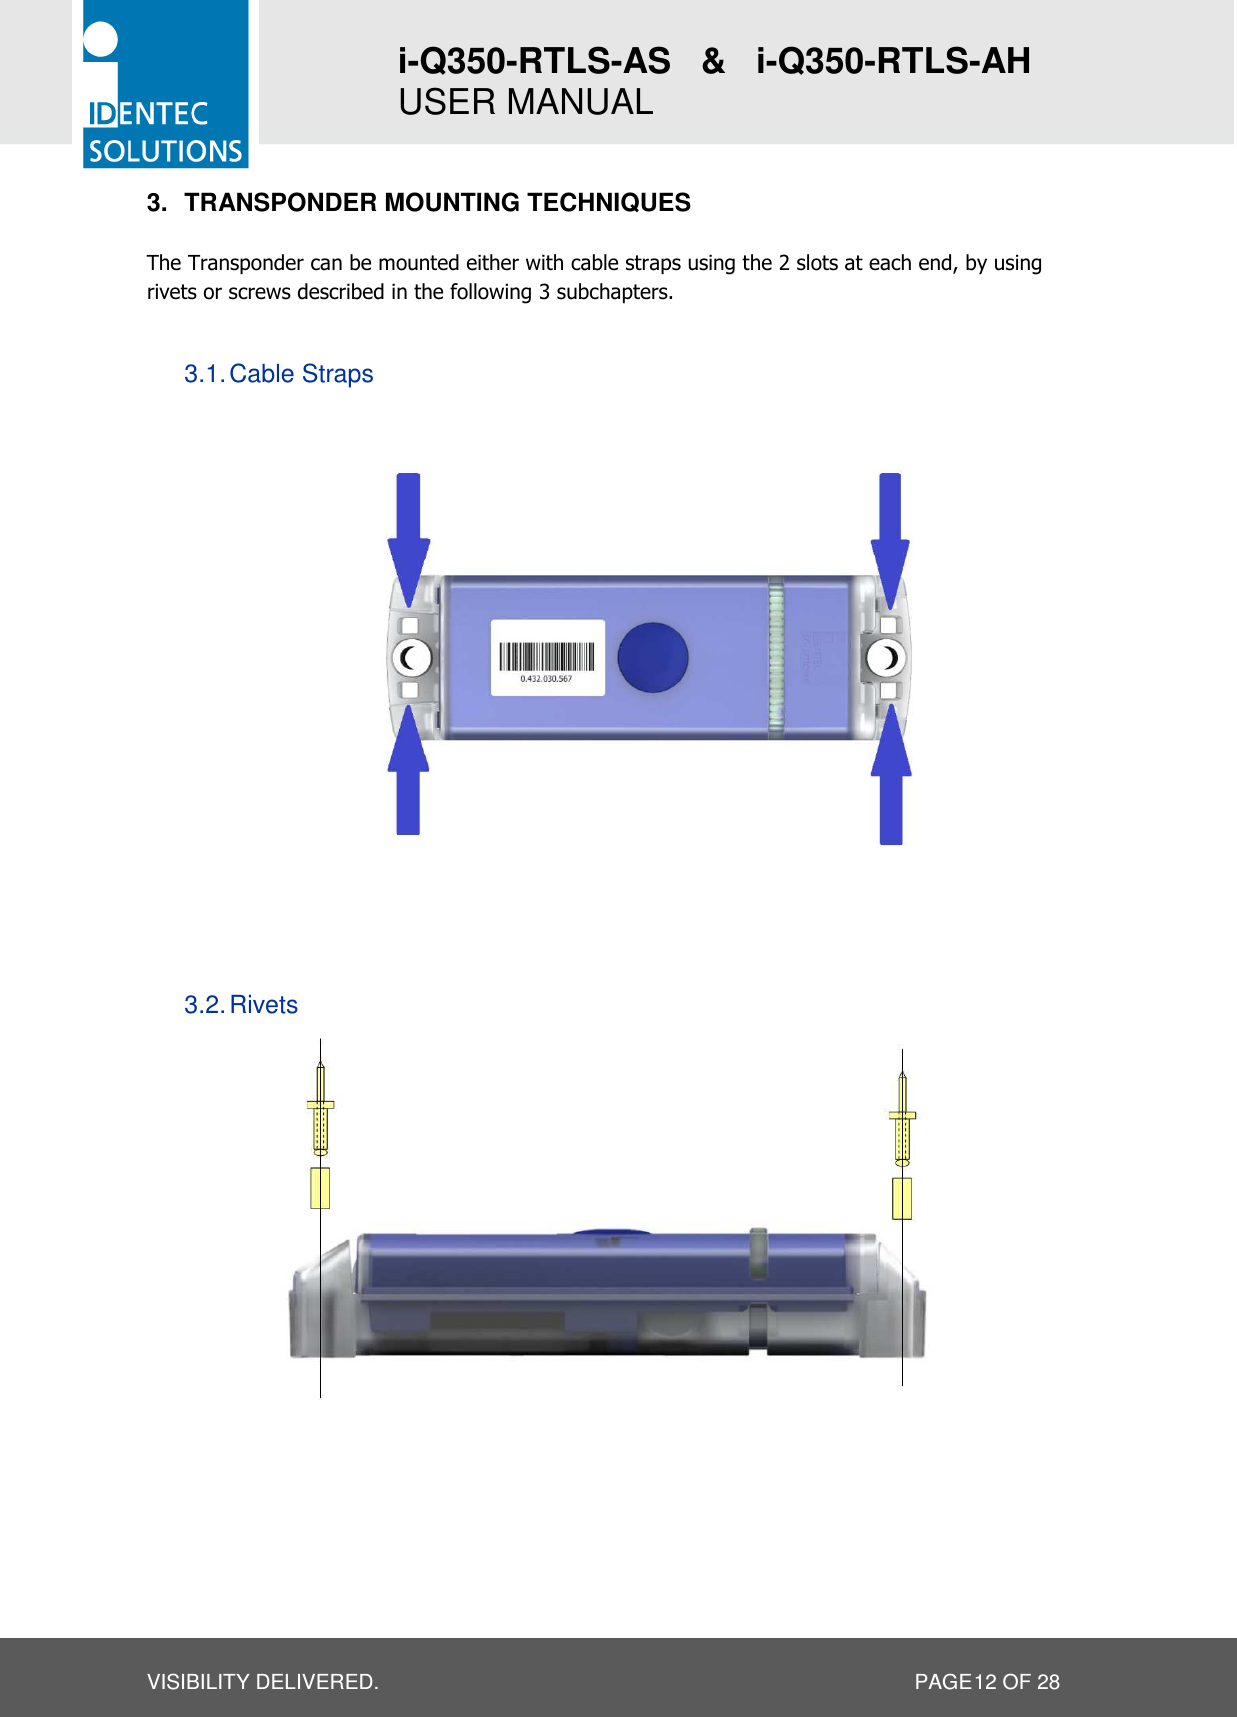 i-Q350-RTLS-AS   &amp;   i-Q350-RTLS-AH   USER MANUAL  VISIBILITY DELIVERED.                   PAGE 12 OF 28 3.  TRANSPONDER MOUNTING TECHNIQUES   The Transponder can be mounted either with cable straps using the 2 slots at each end, by using rivets or screws described in the following 3 subchapters.  3.1. Cable Straps                                       3.2. Rivets  